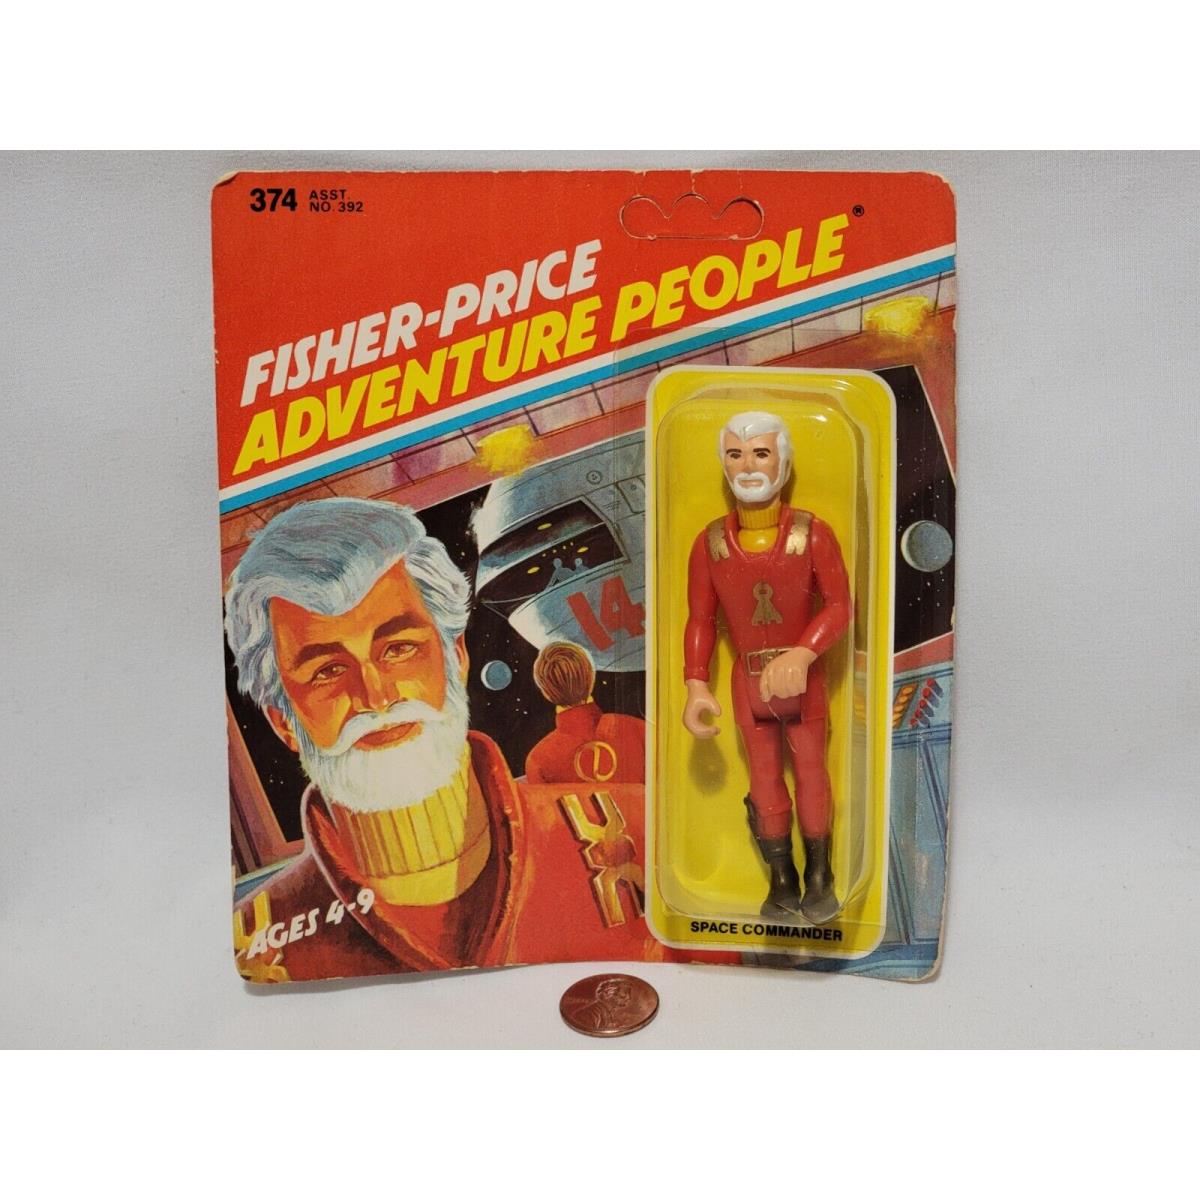 Read Fisher Price Adventure People Space Commander Toy Figure 1979